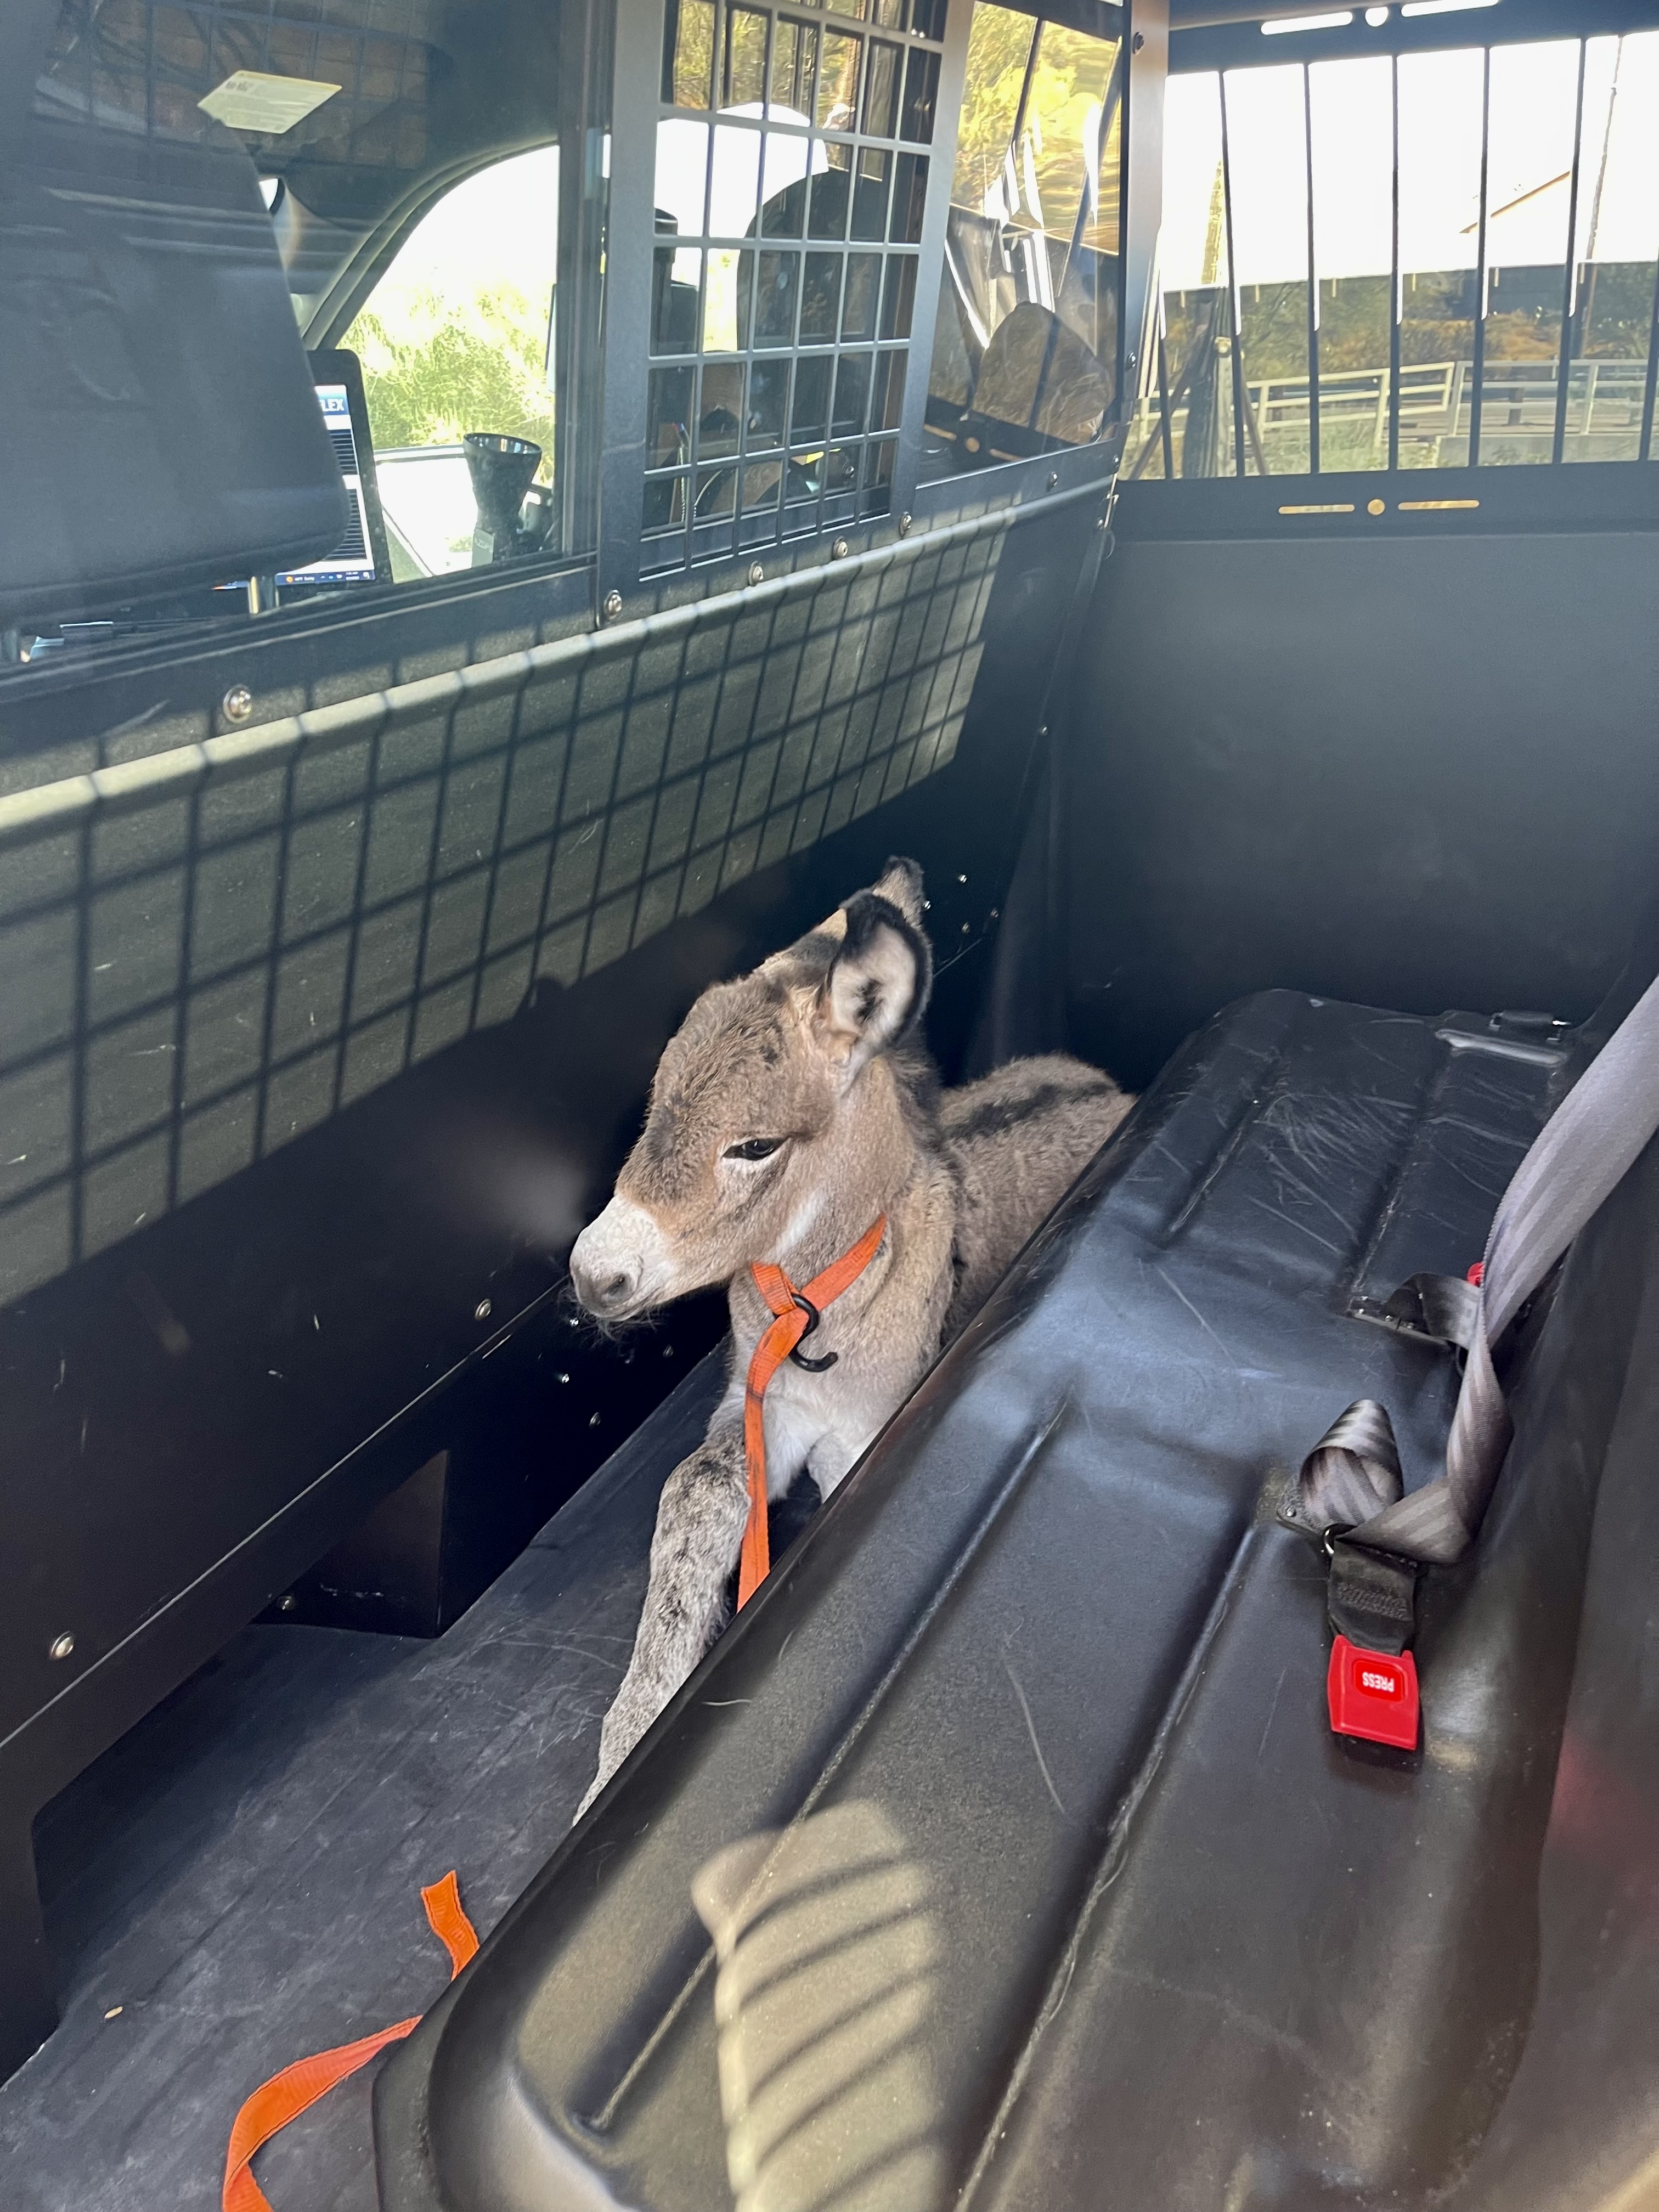 Baby burro in the back of a patrol vehicle being taken to a rescue